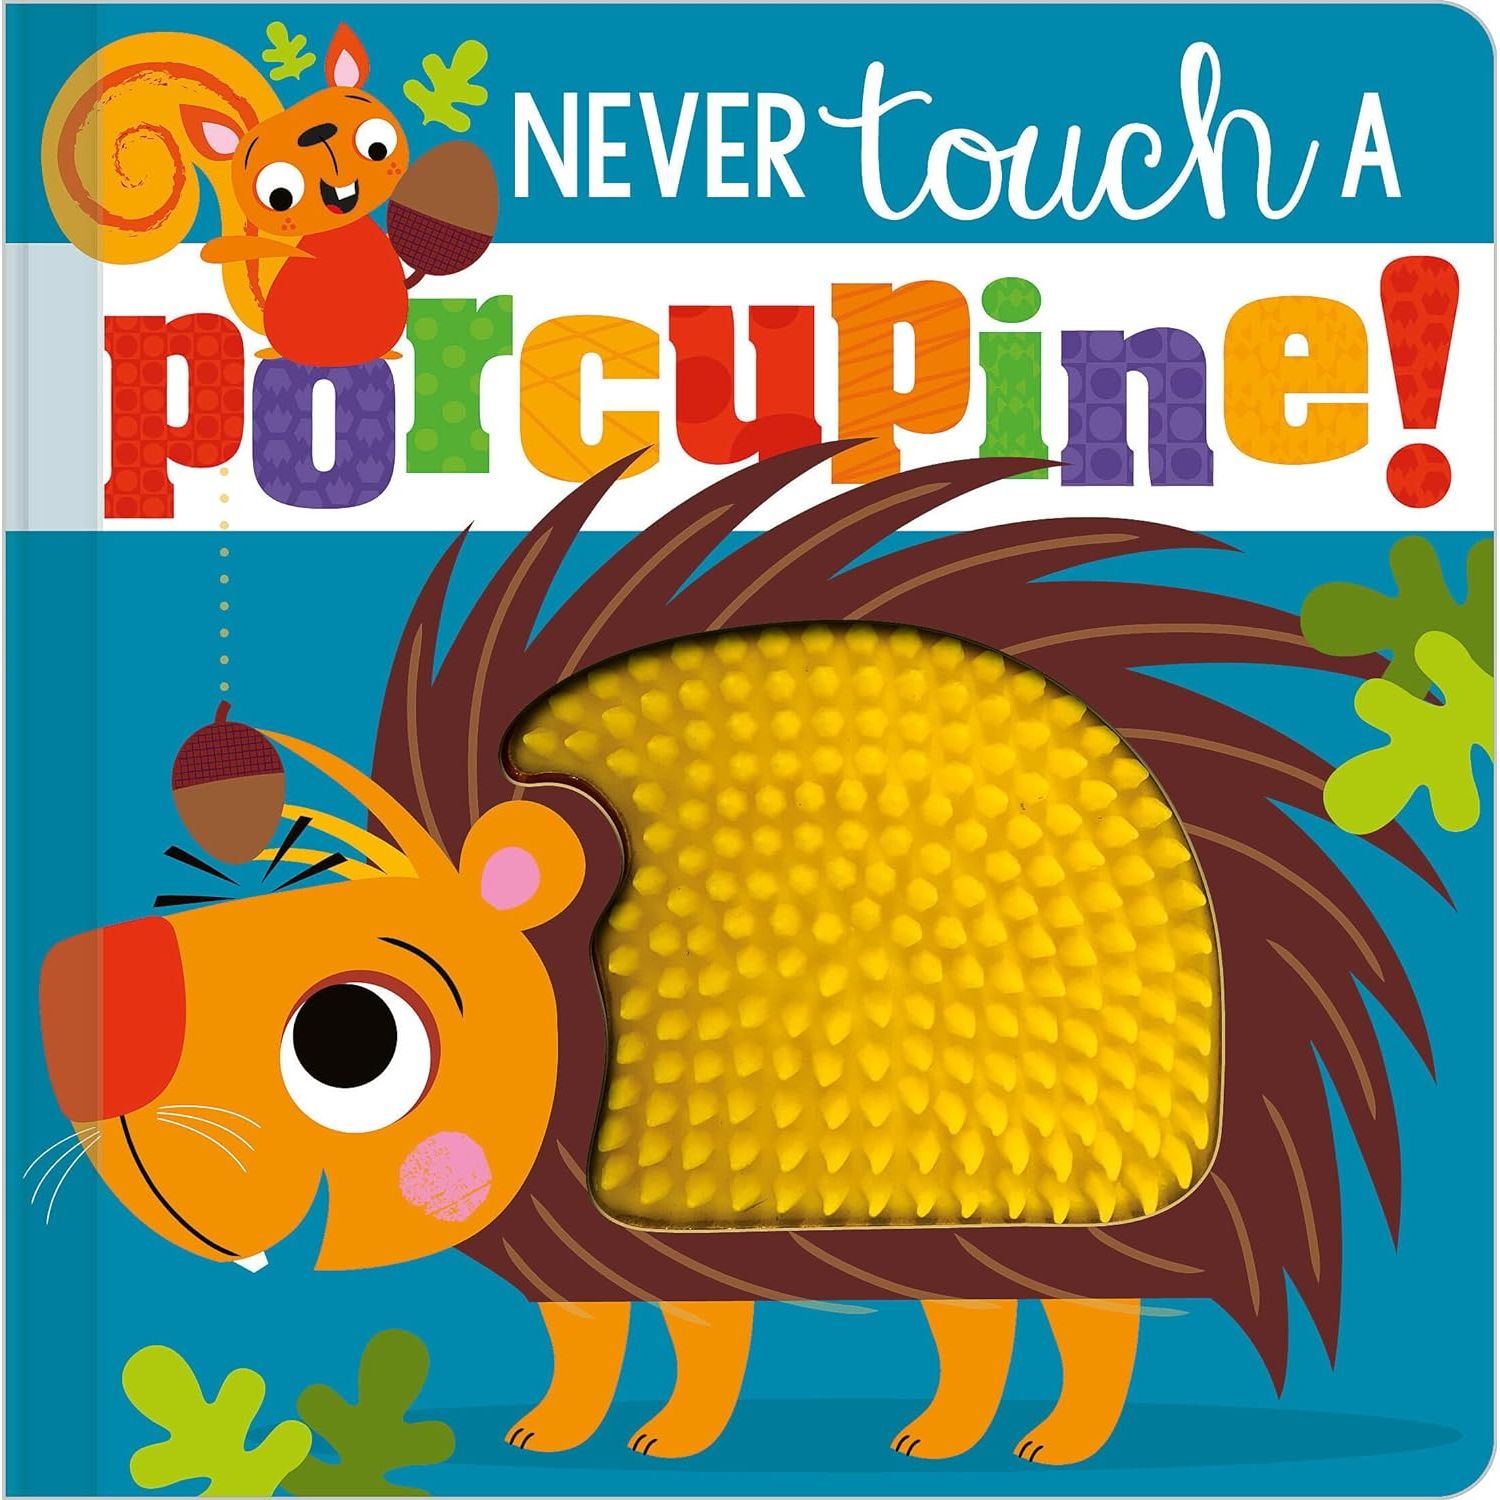 Make Believe Ideas Books Never Touch a Porcupine!